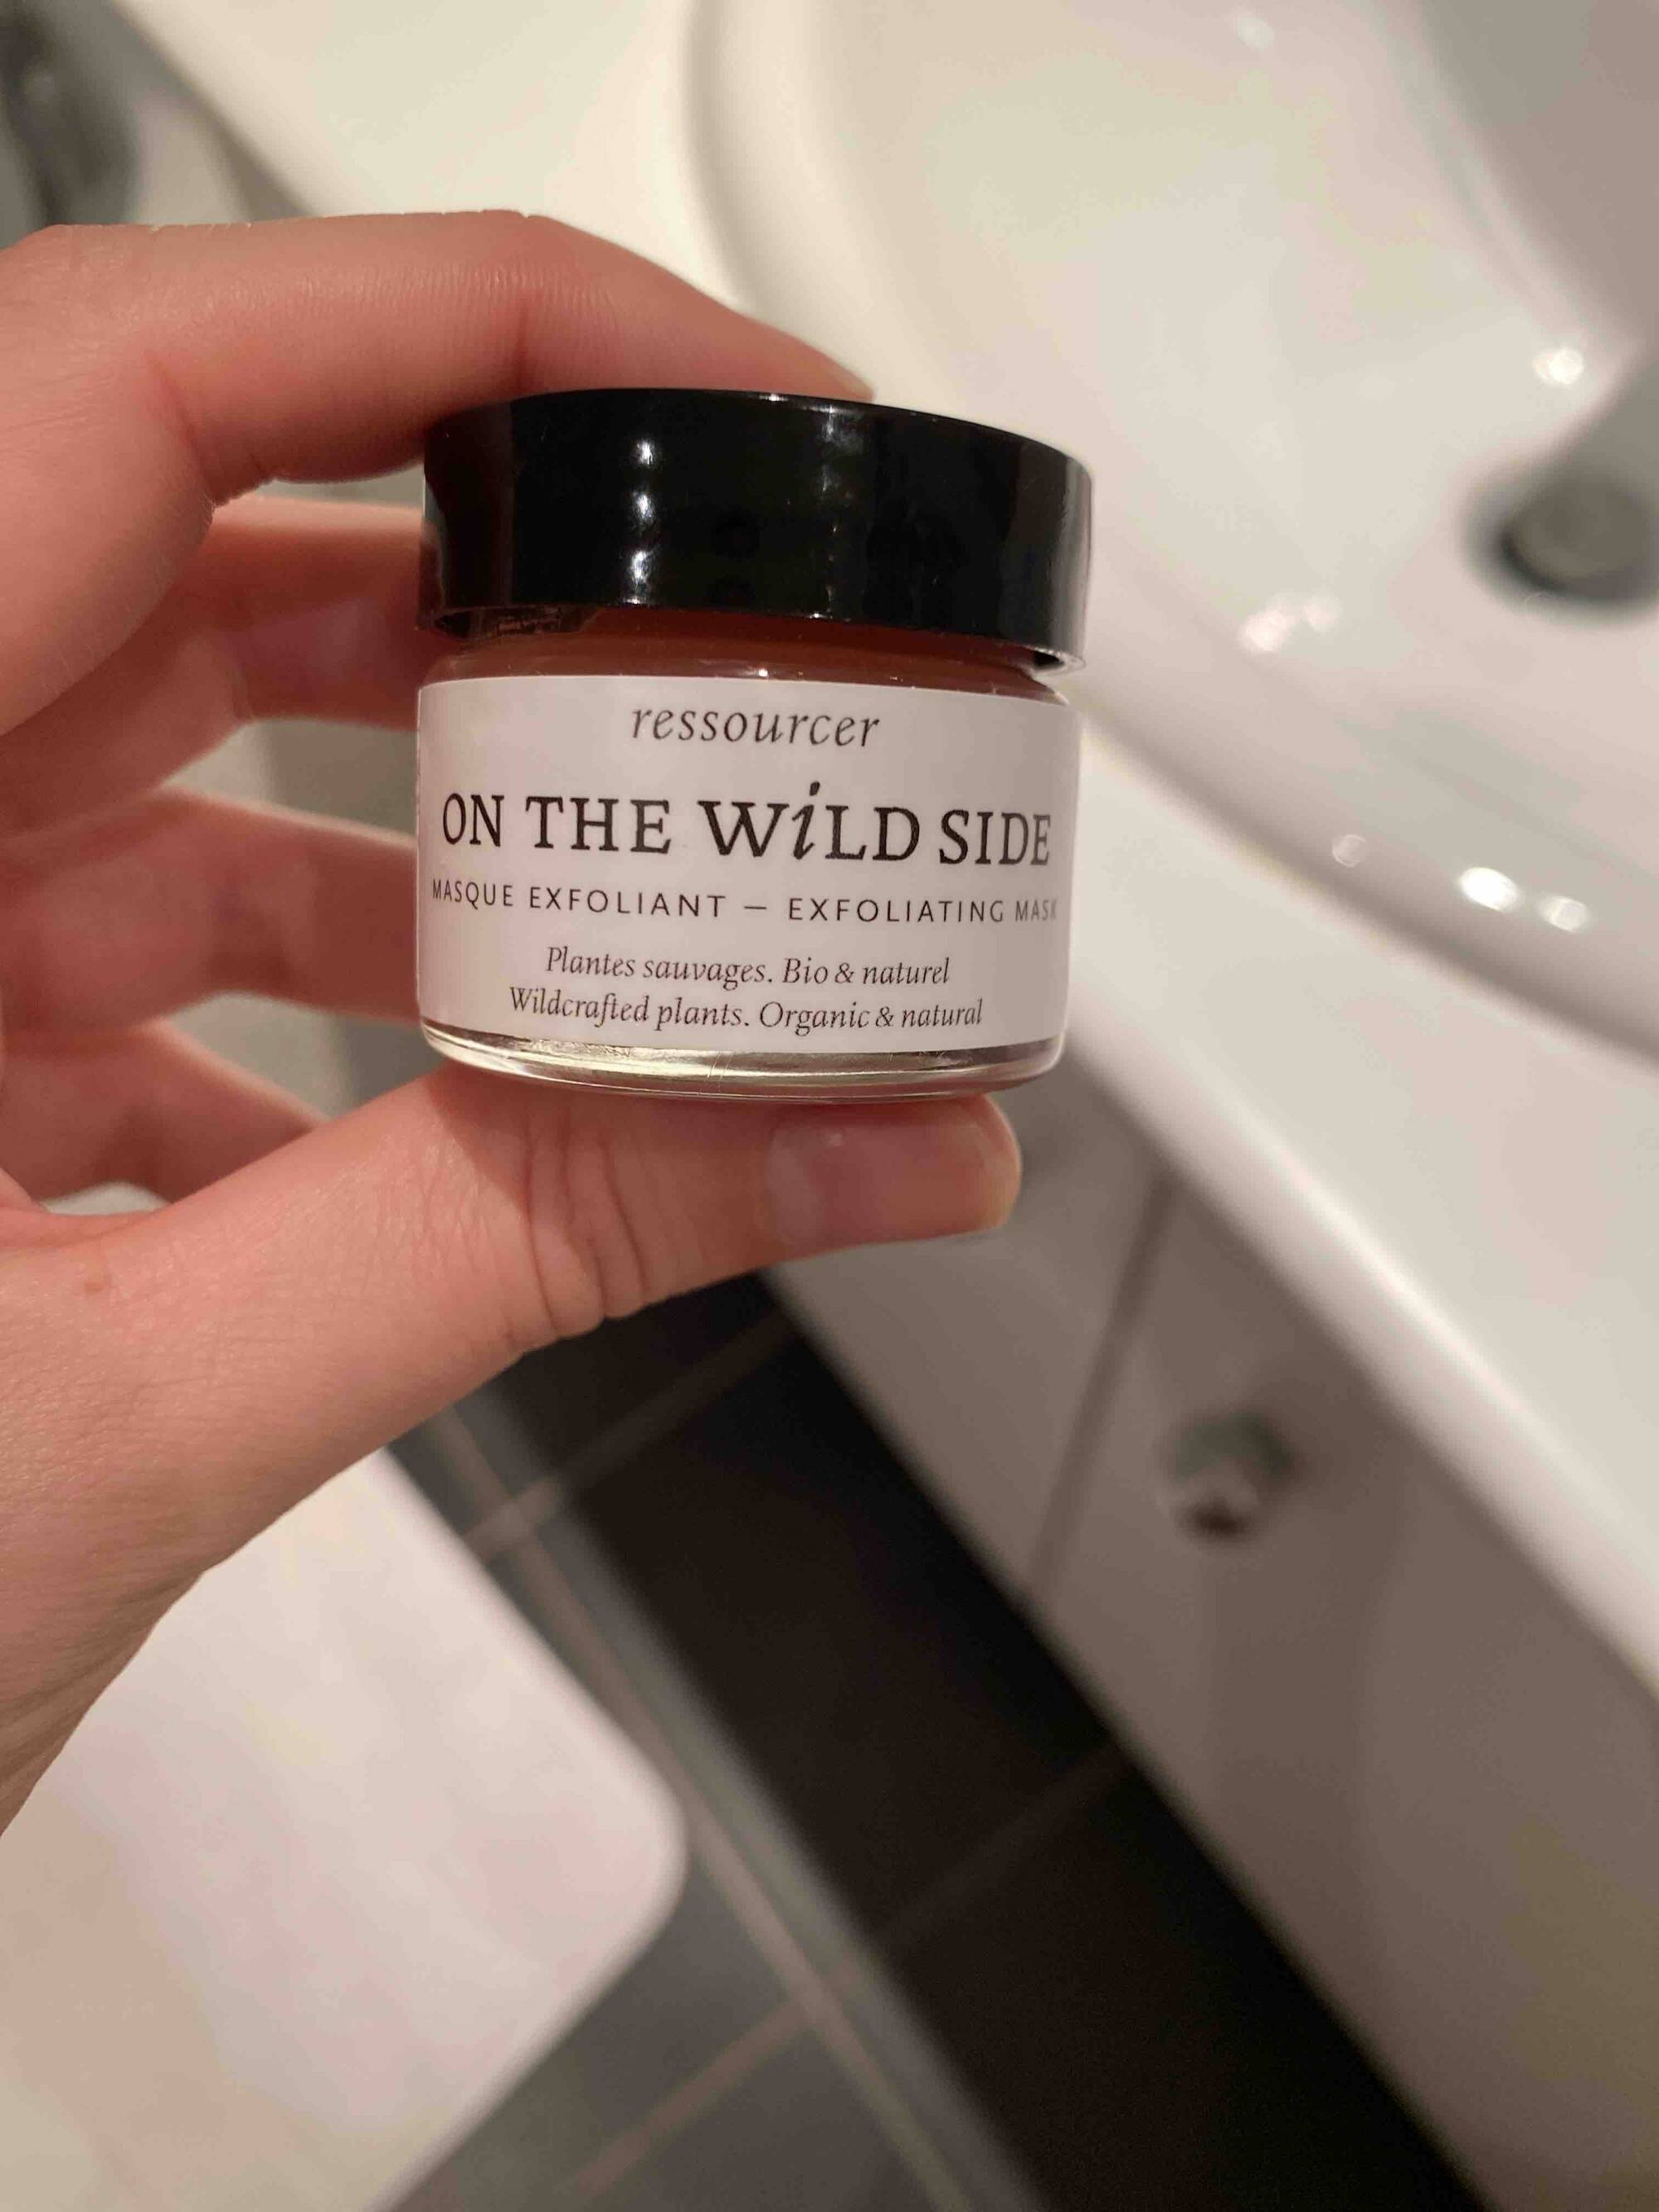 ON THE WILD SIDE - Masque exfoliant